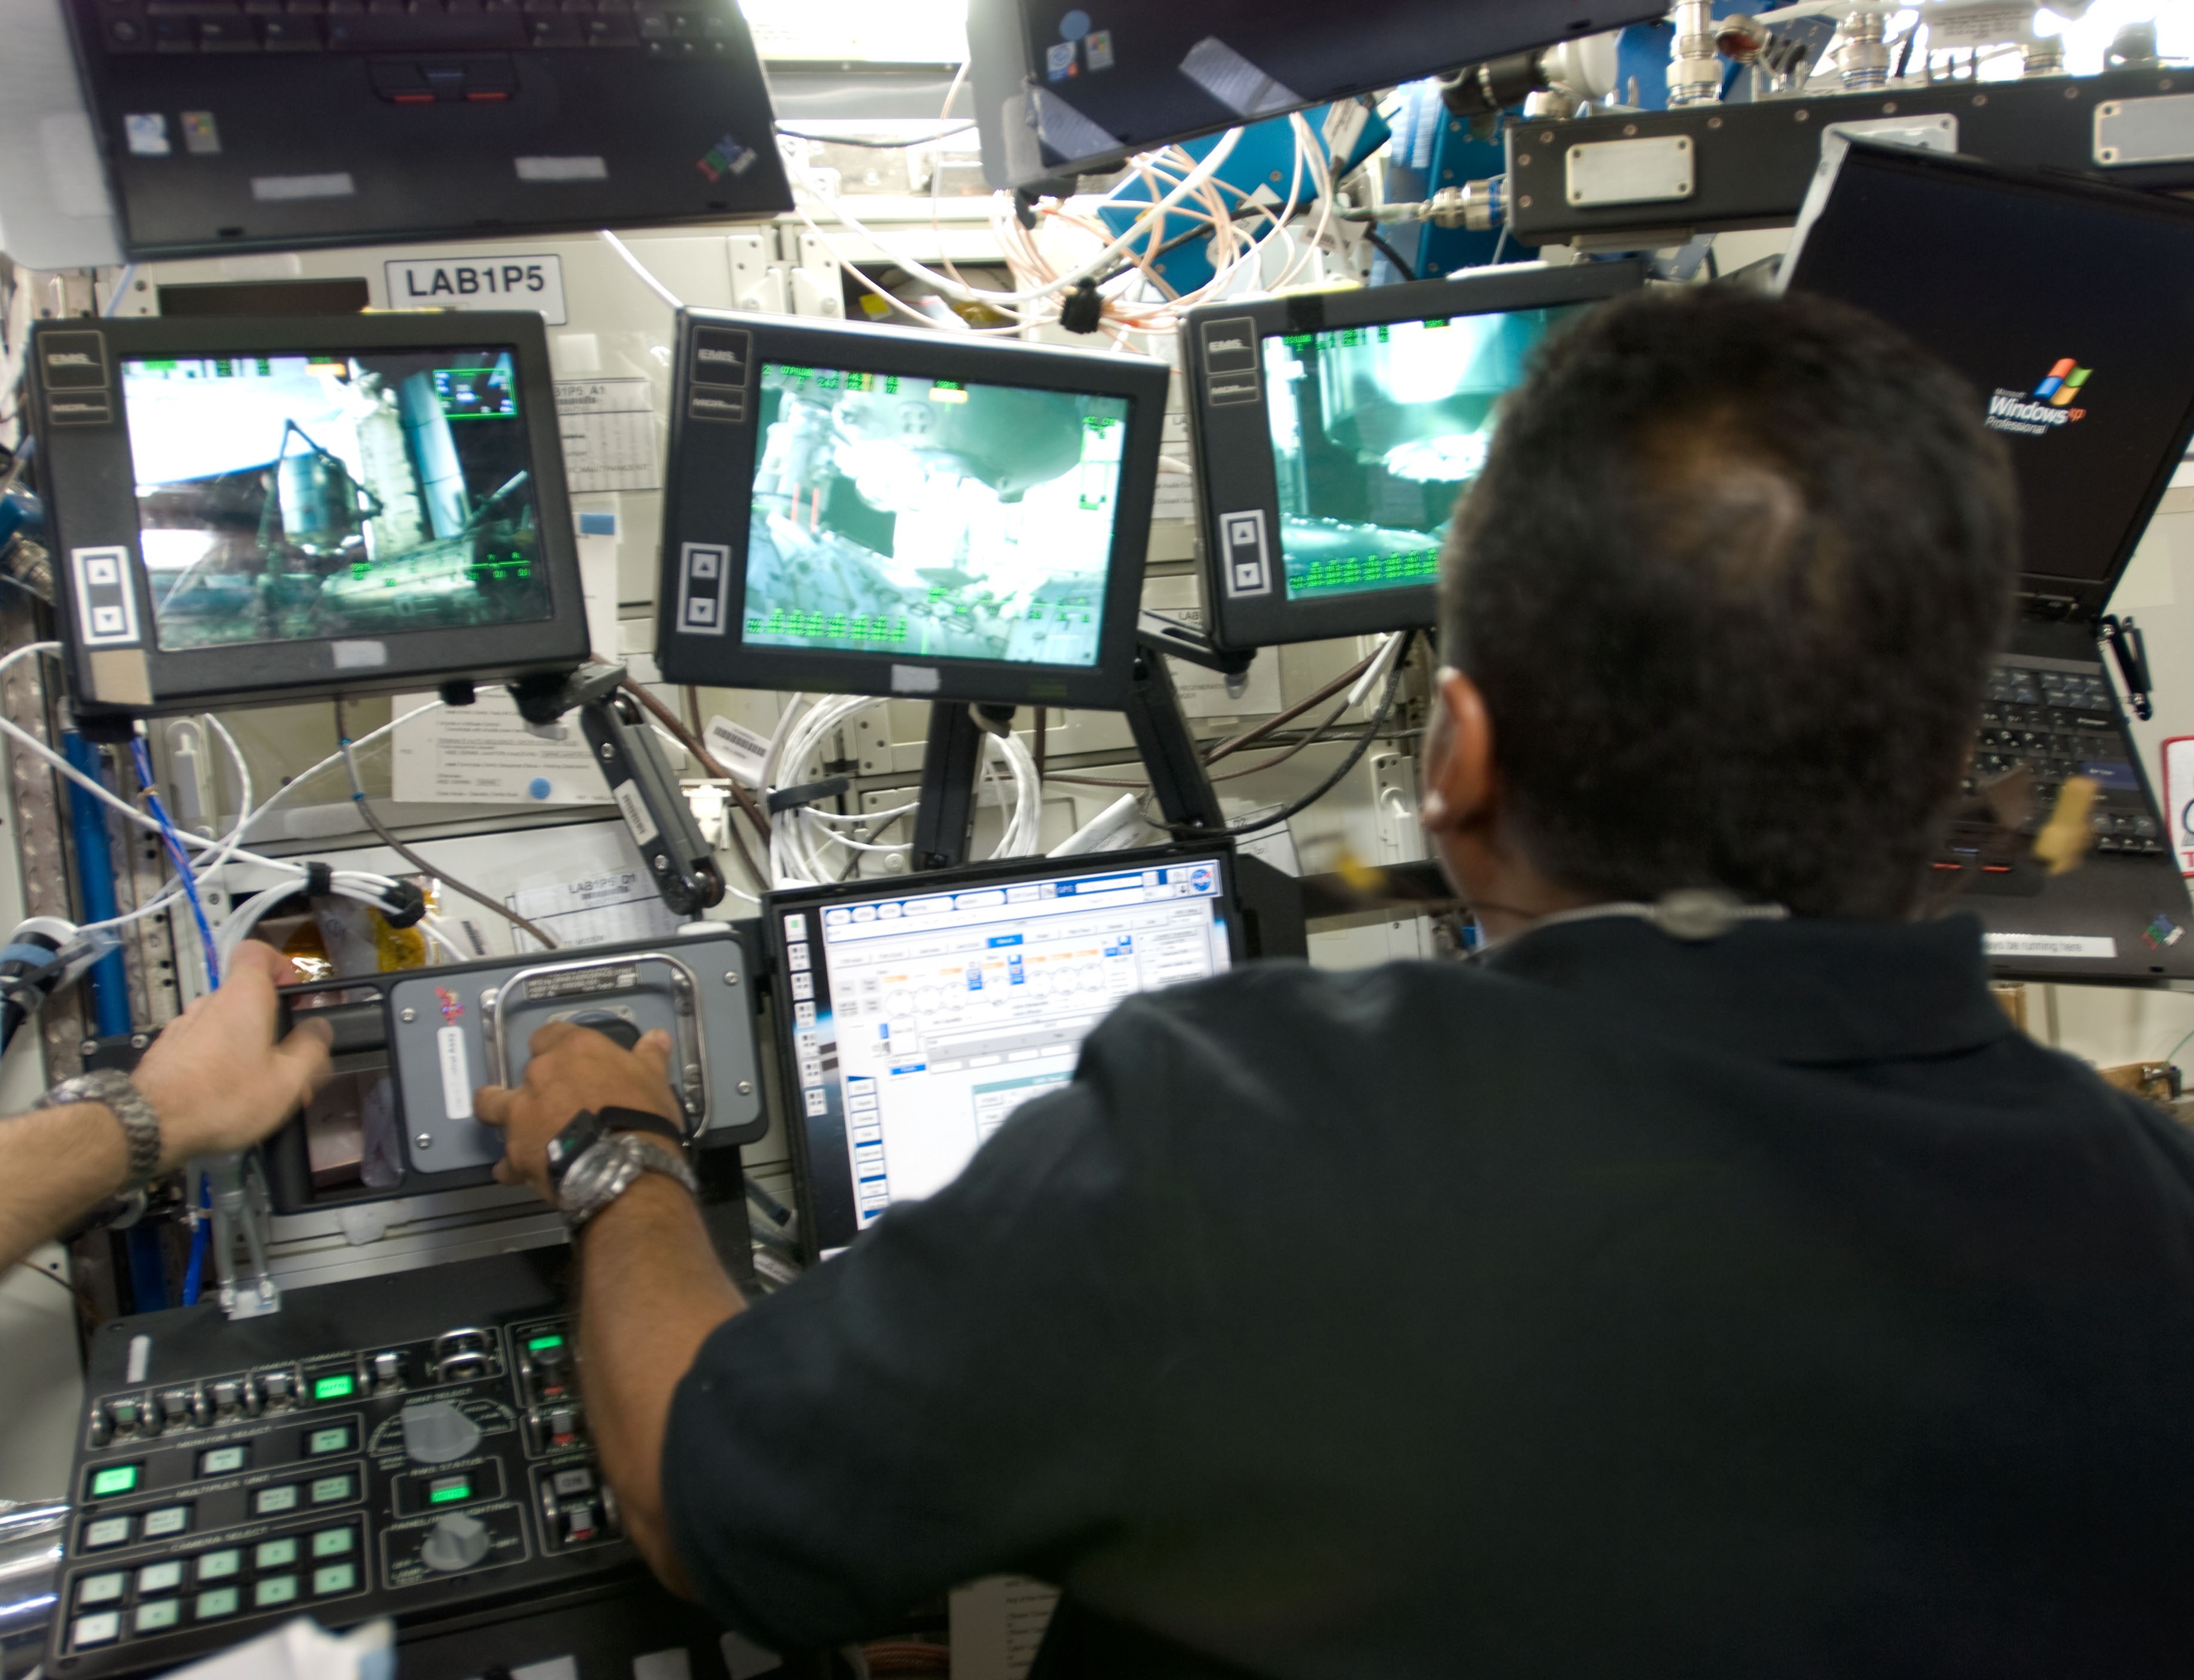 NASA astronaut José M. Hernández operating the station’s robotic arm to return the MPLM to the shuttle’s payload bay.